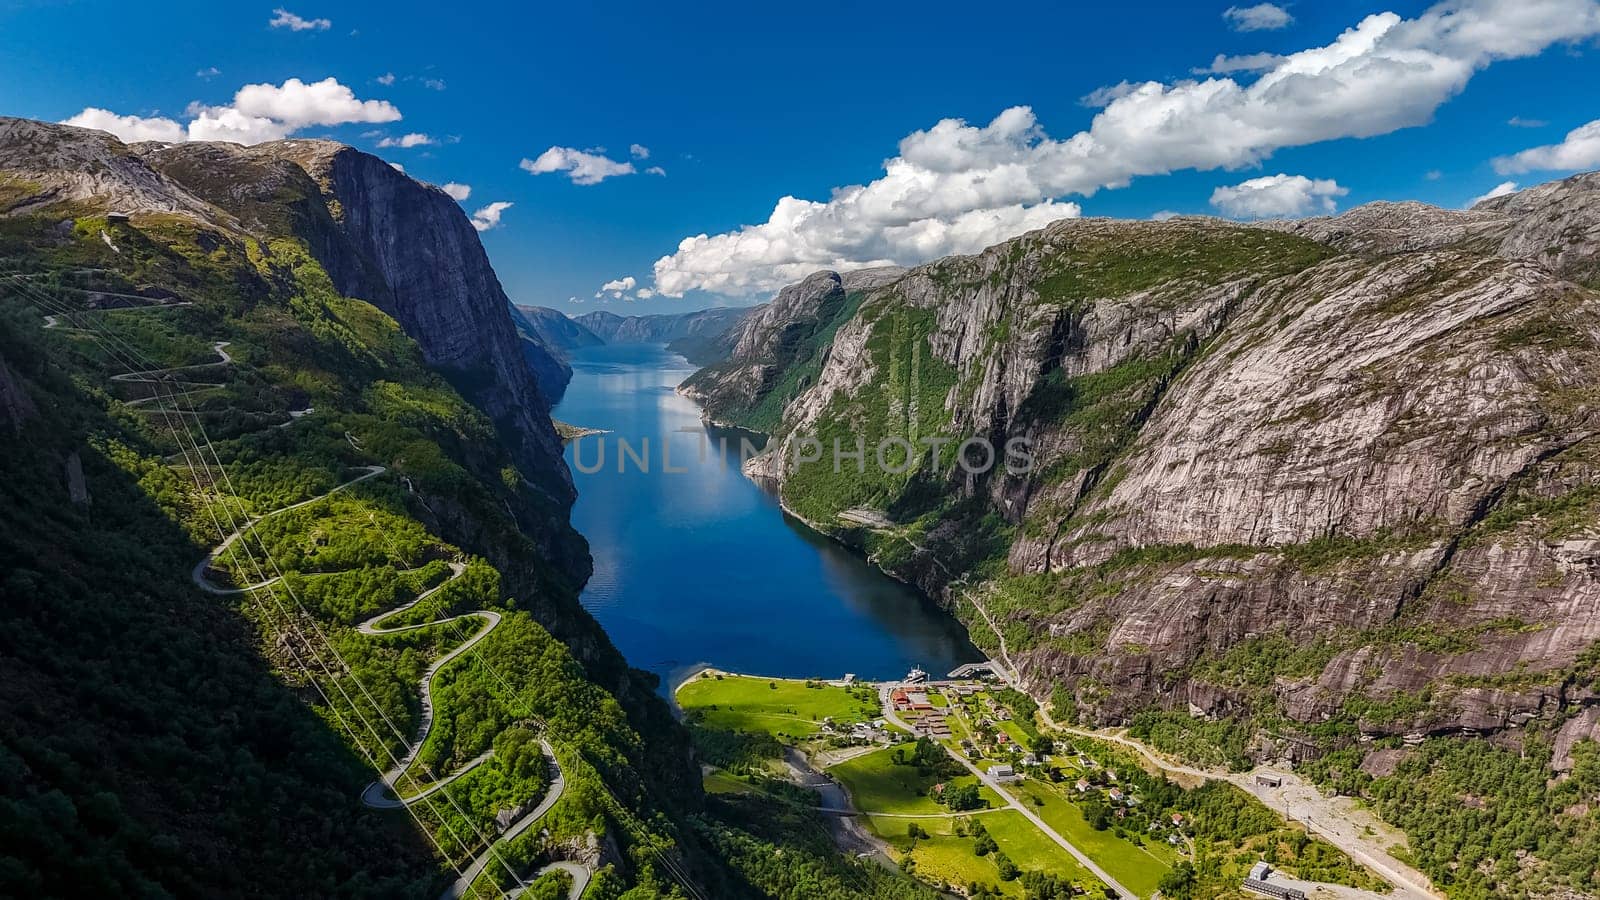 An aerial view of a winding road snaking through the dramatic, green cliffs of a Norwegian fjord on a bright, sunny day. Kjerag, Lysebotn, Lysefjorden, Norway